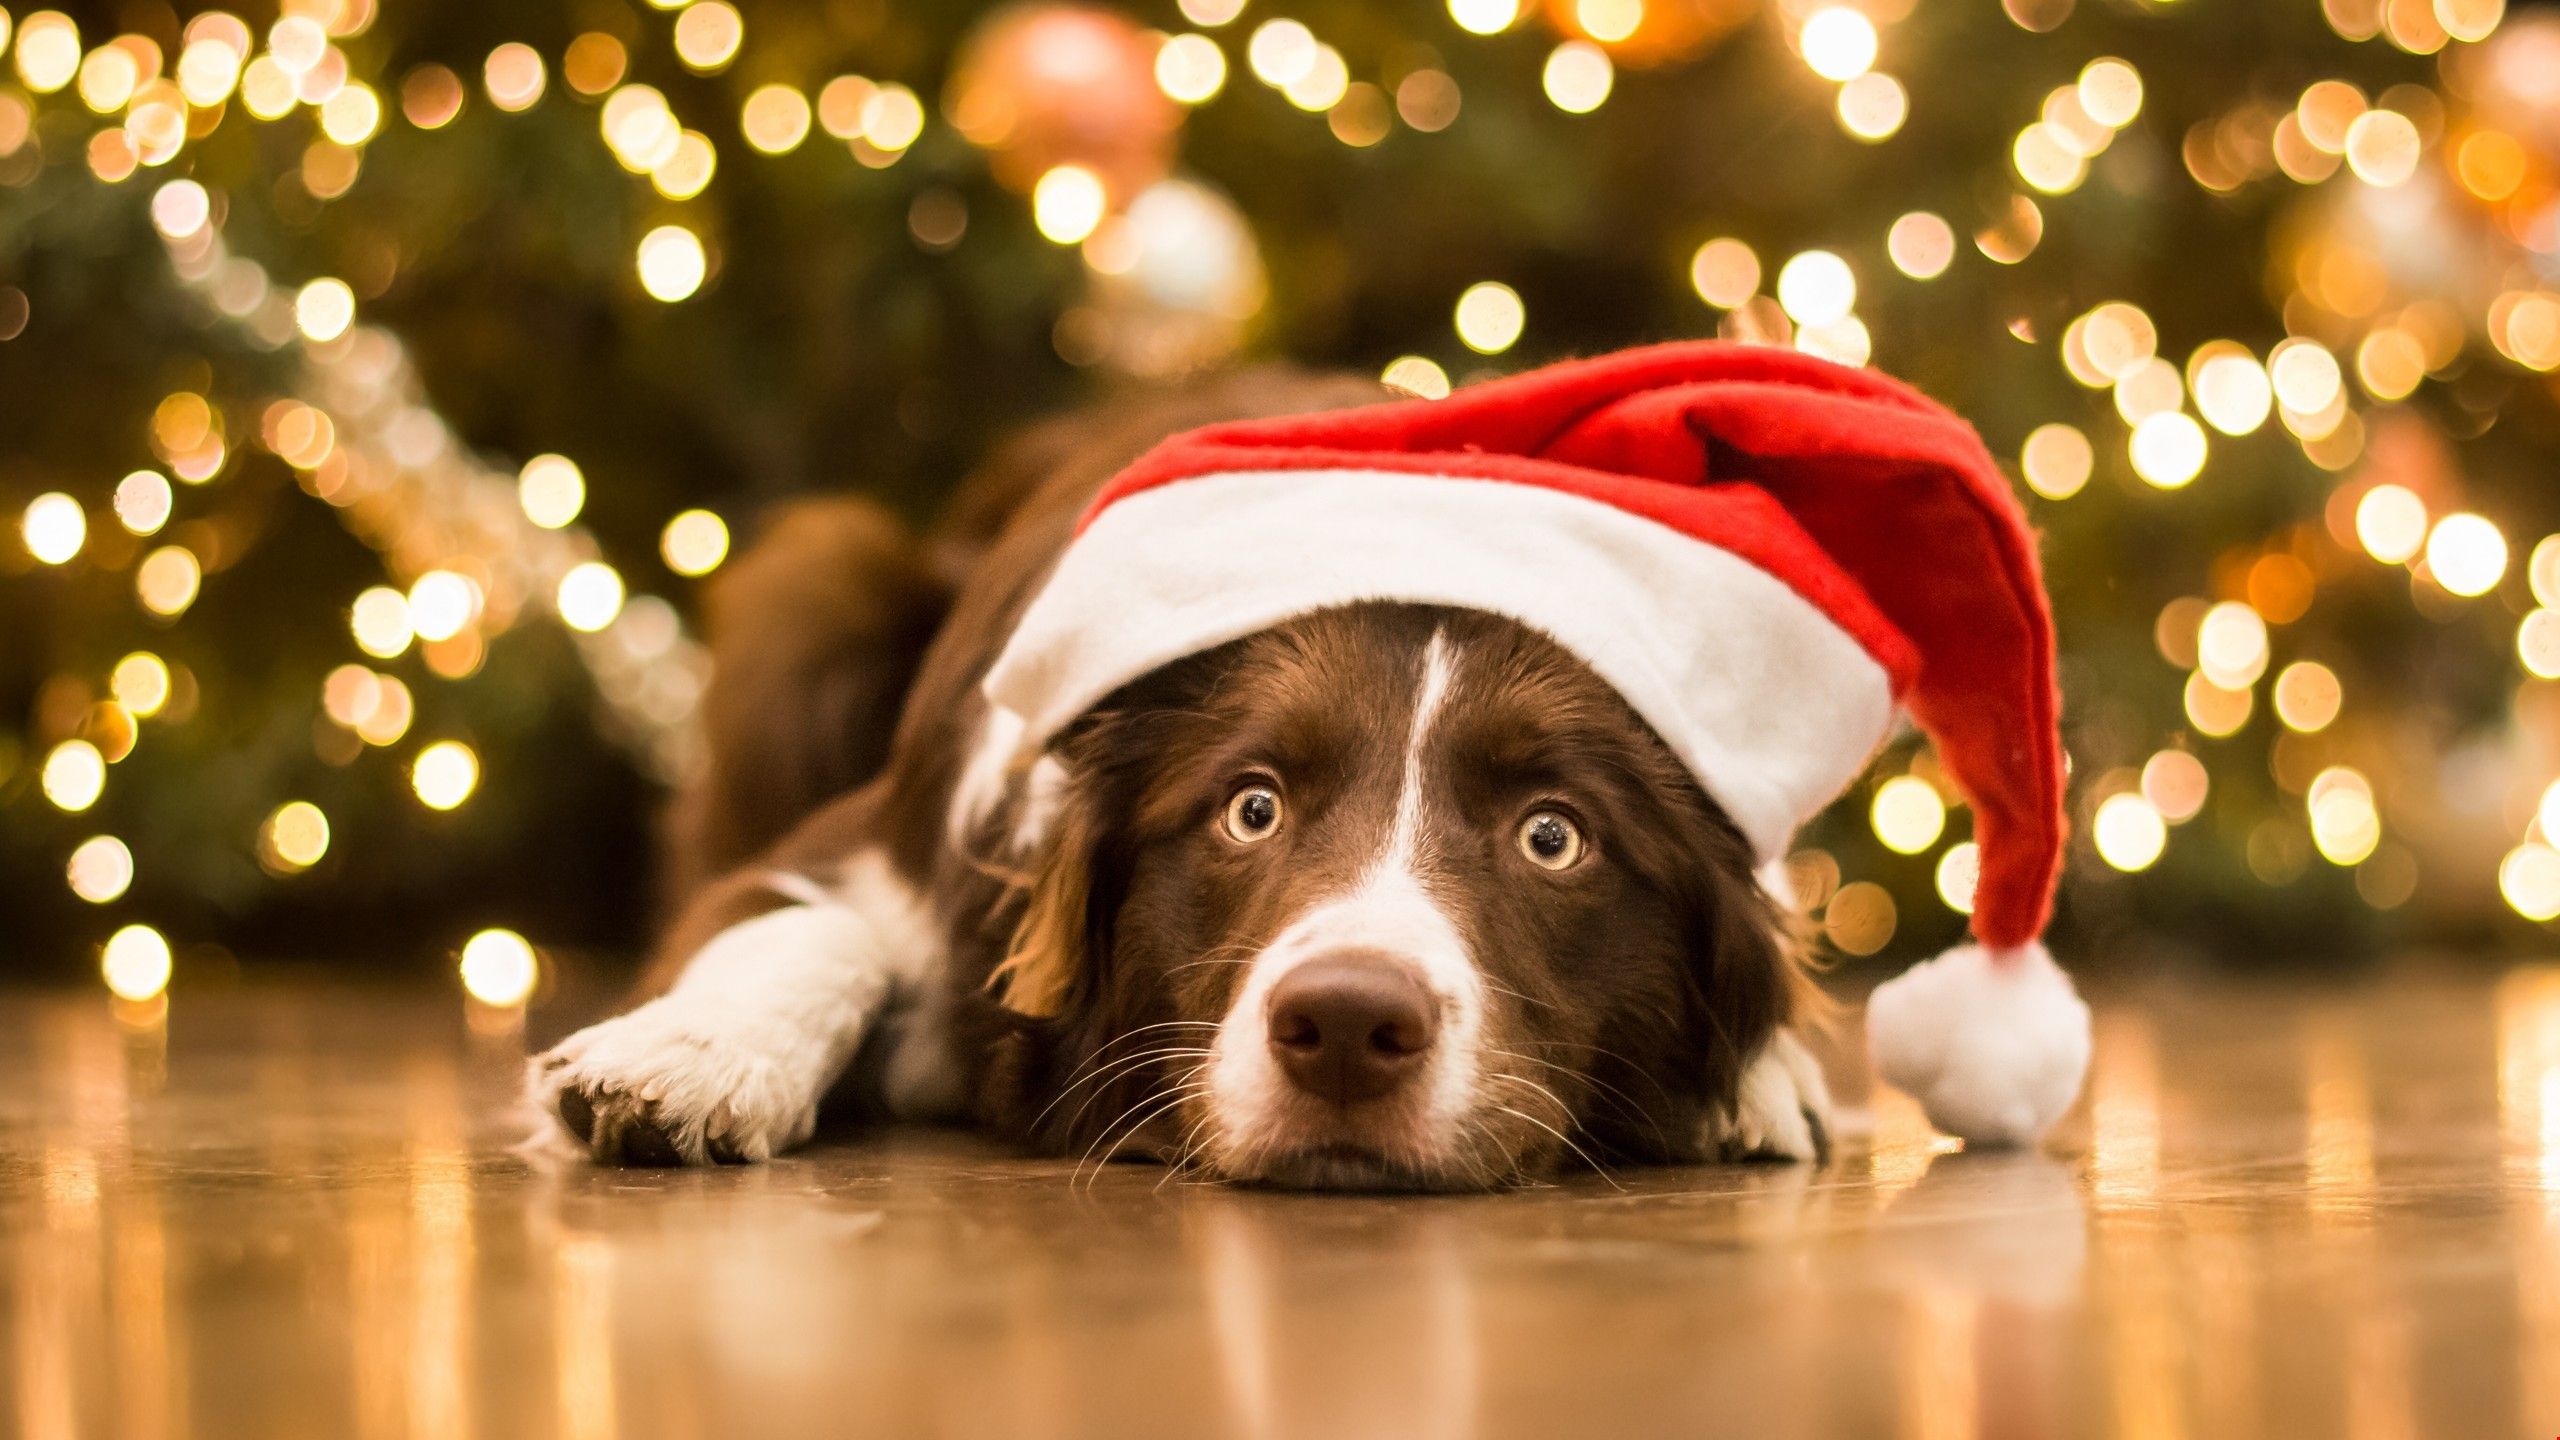 55 Dogs Christmas Wallpapers   Download at WallpaperBro